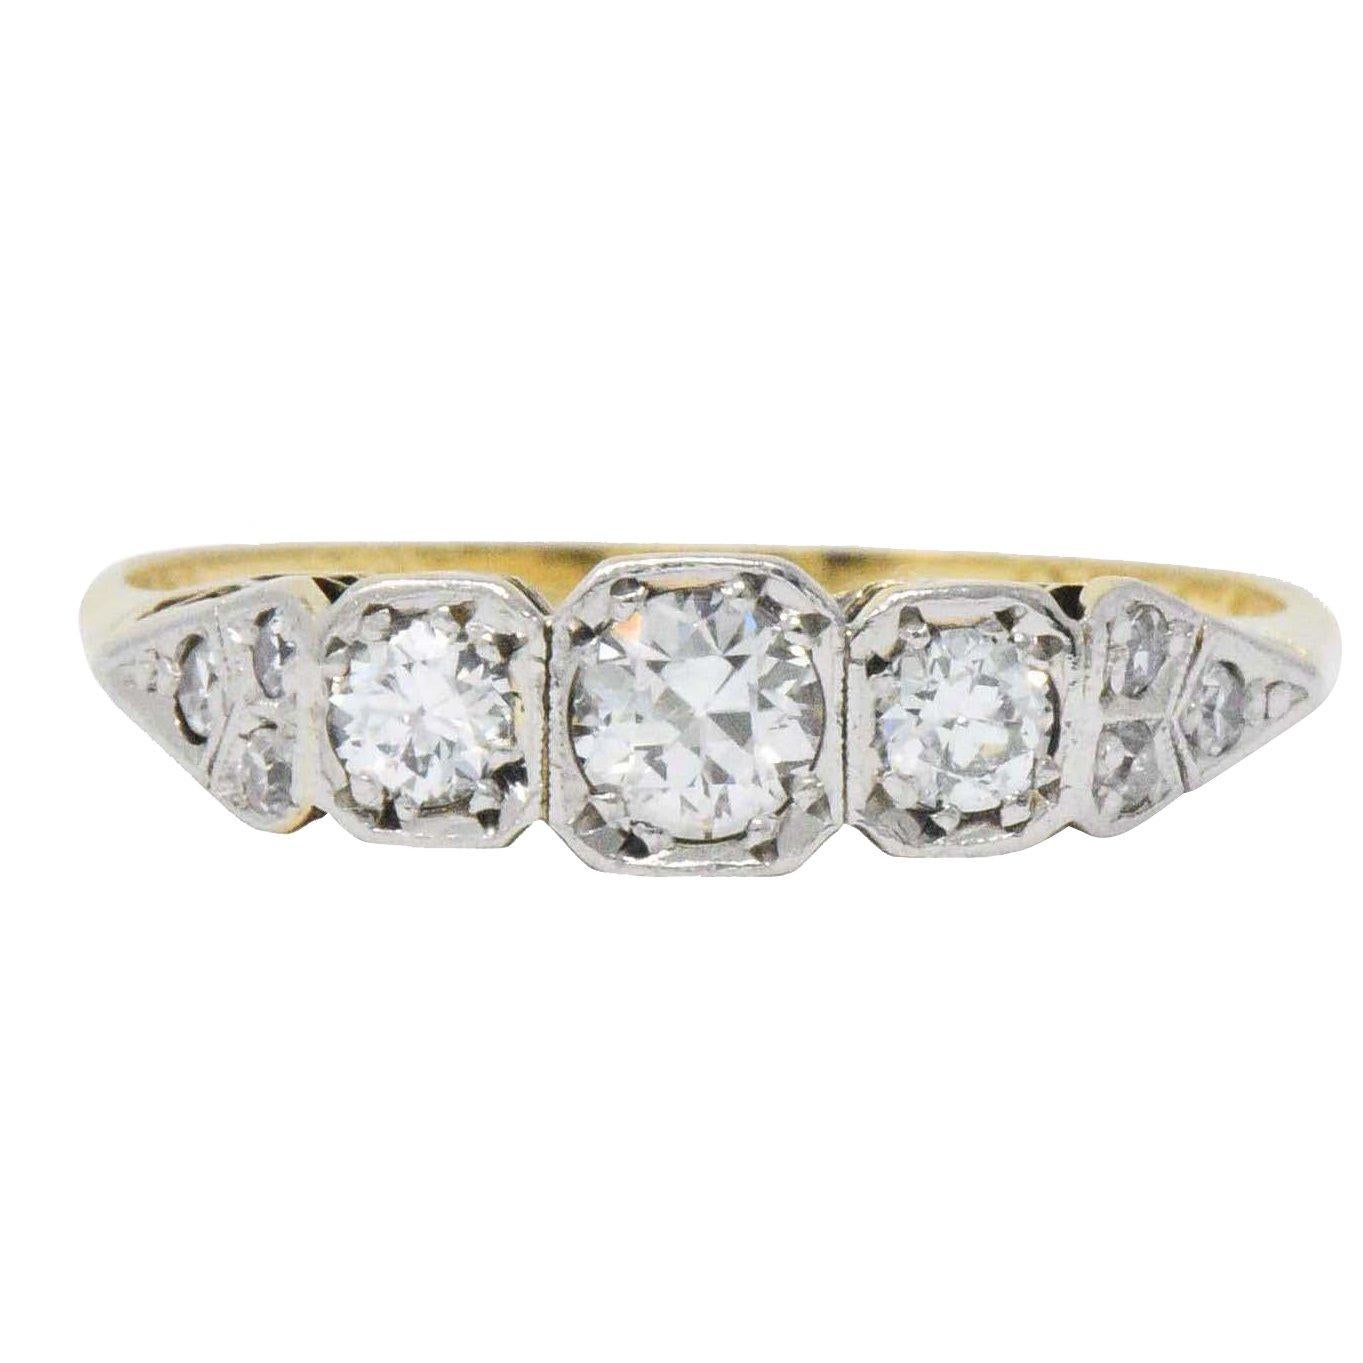 Saunders Late Victorian 0.40 CTW Diamond And Platinum-Topped 18 Karat Gold Ring